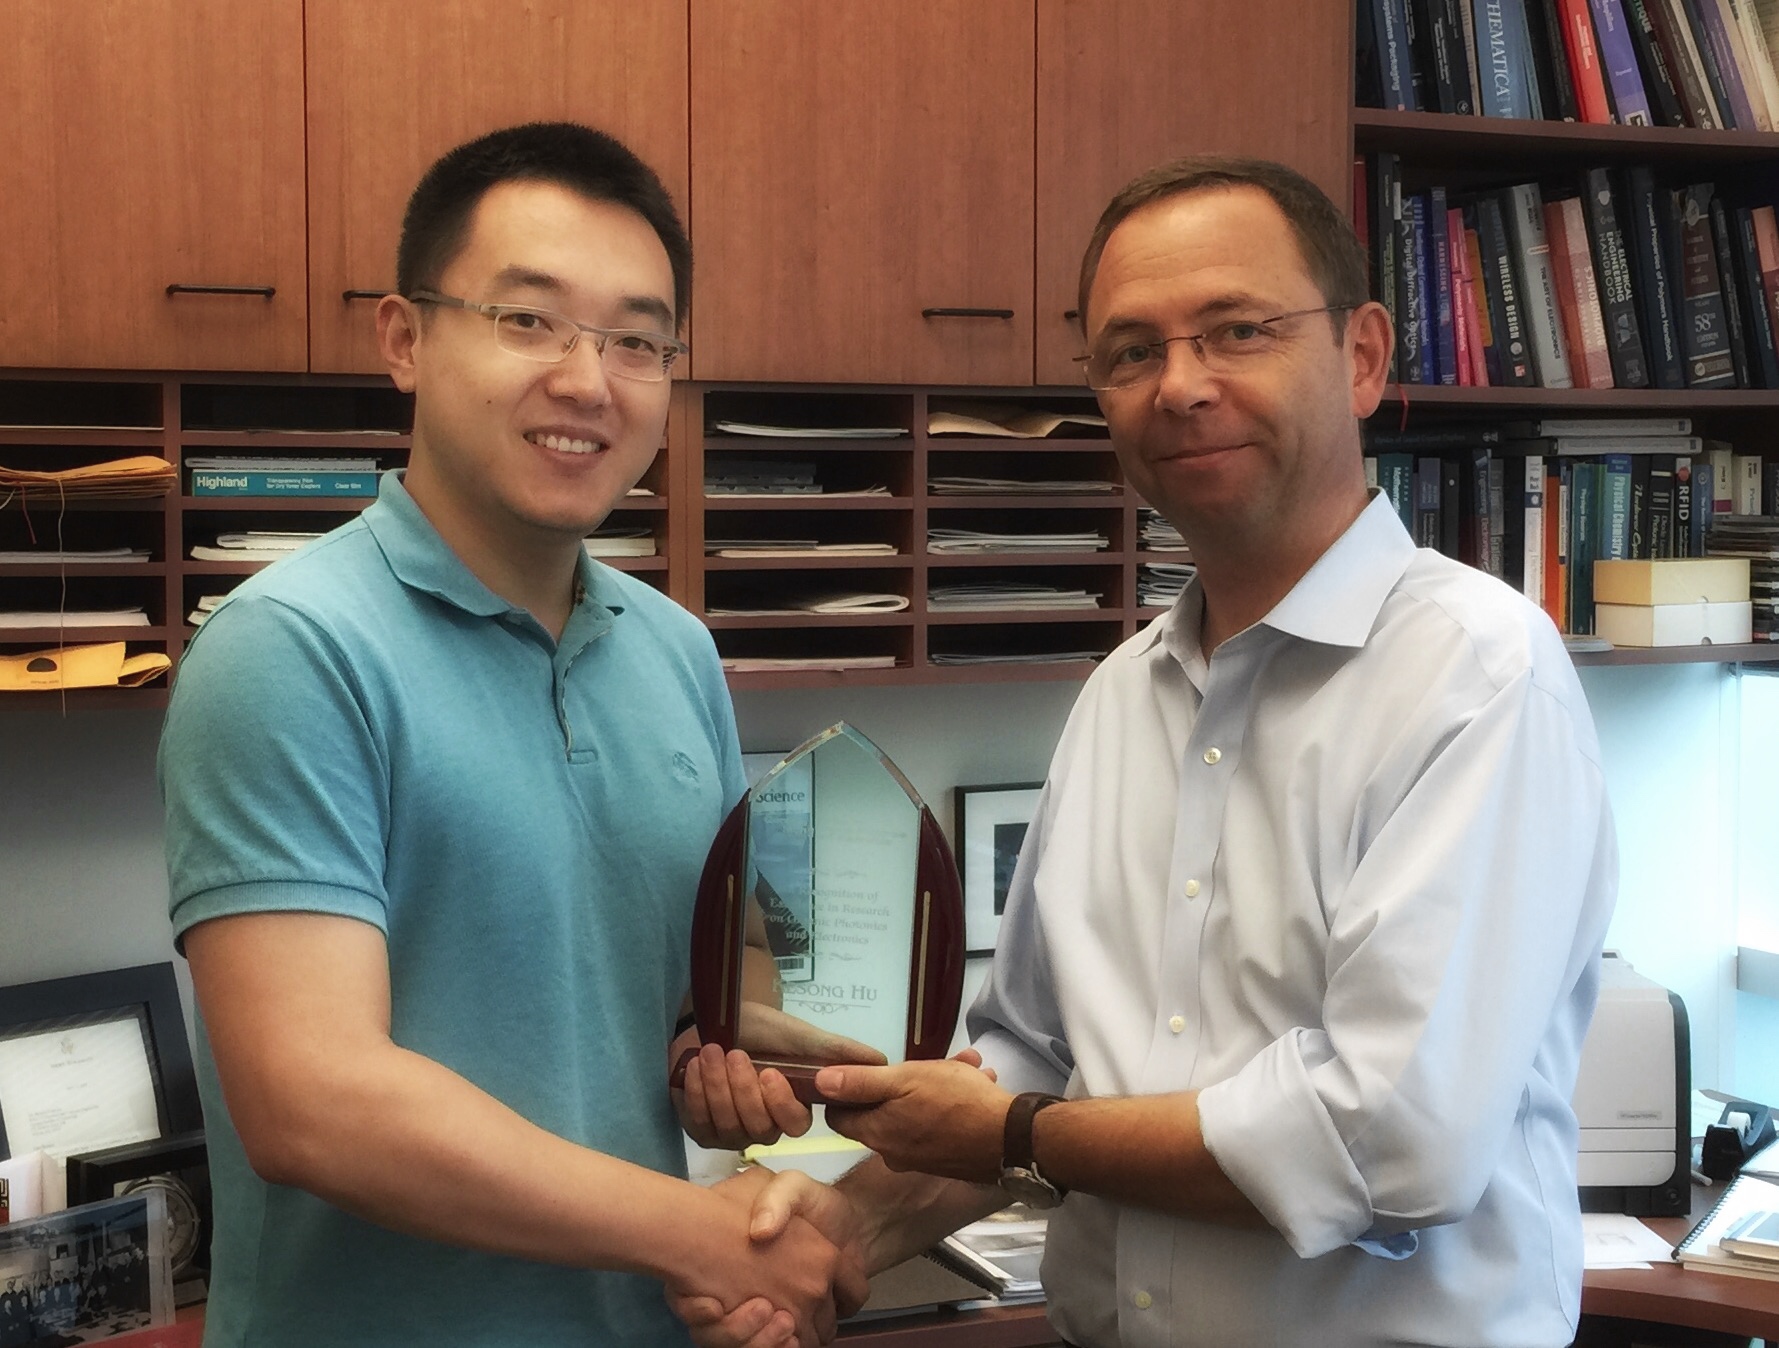 Senior graduate student Kesong Hu (left) accepts award from director of the Center for Organic Photonics and Electronics (COPE), Prof. Kippelen (right).